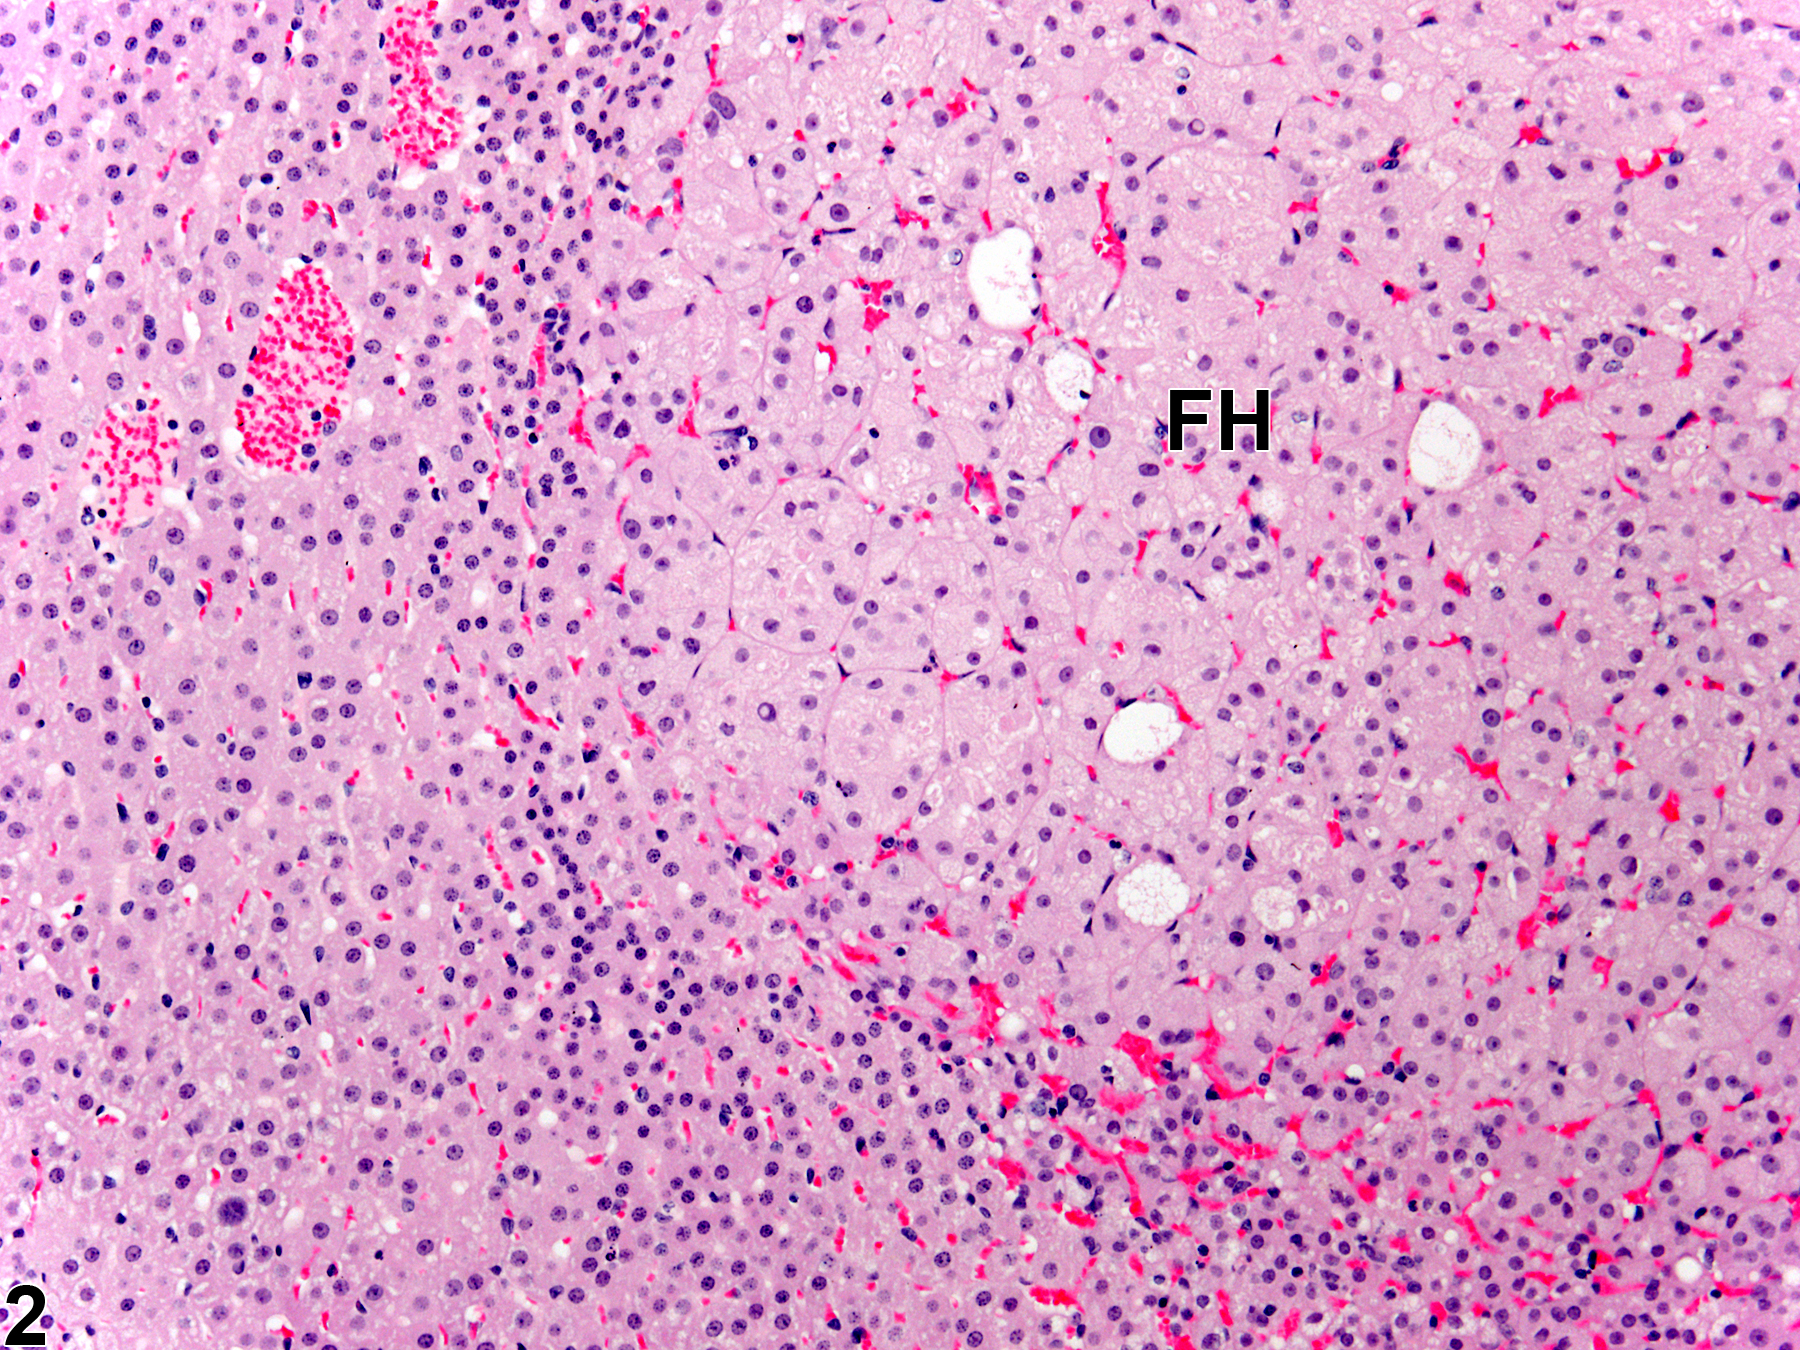 Image of hypertrophy in the adrenal gland cortex from a female Sprague-Dawley rat in a chronic study